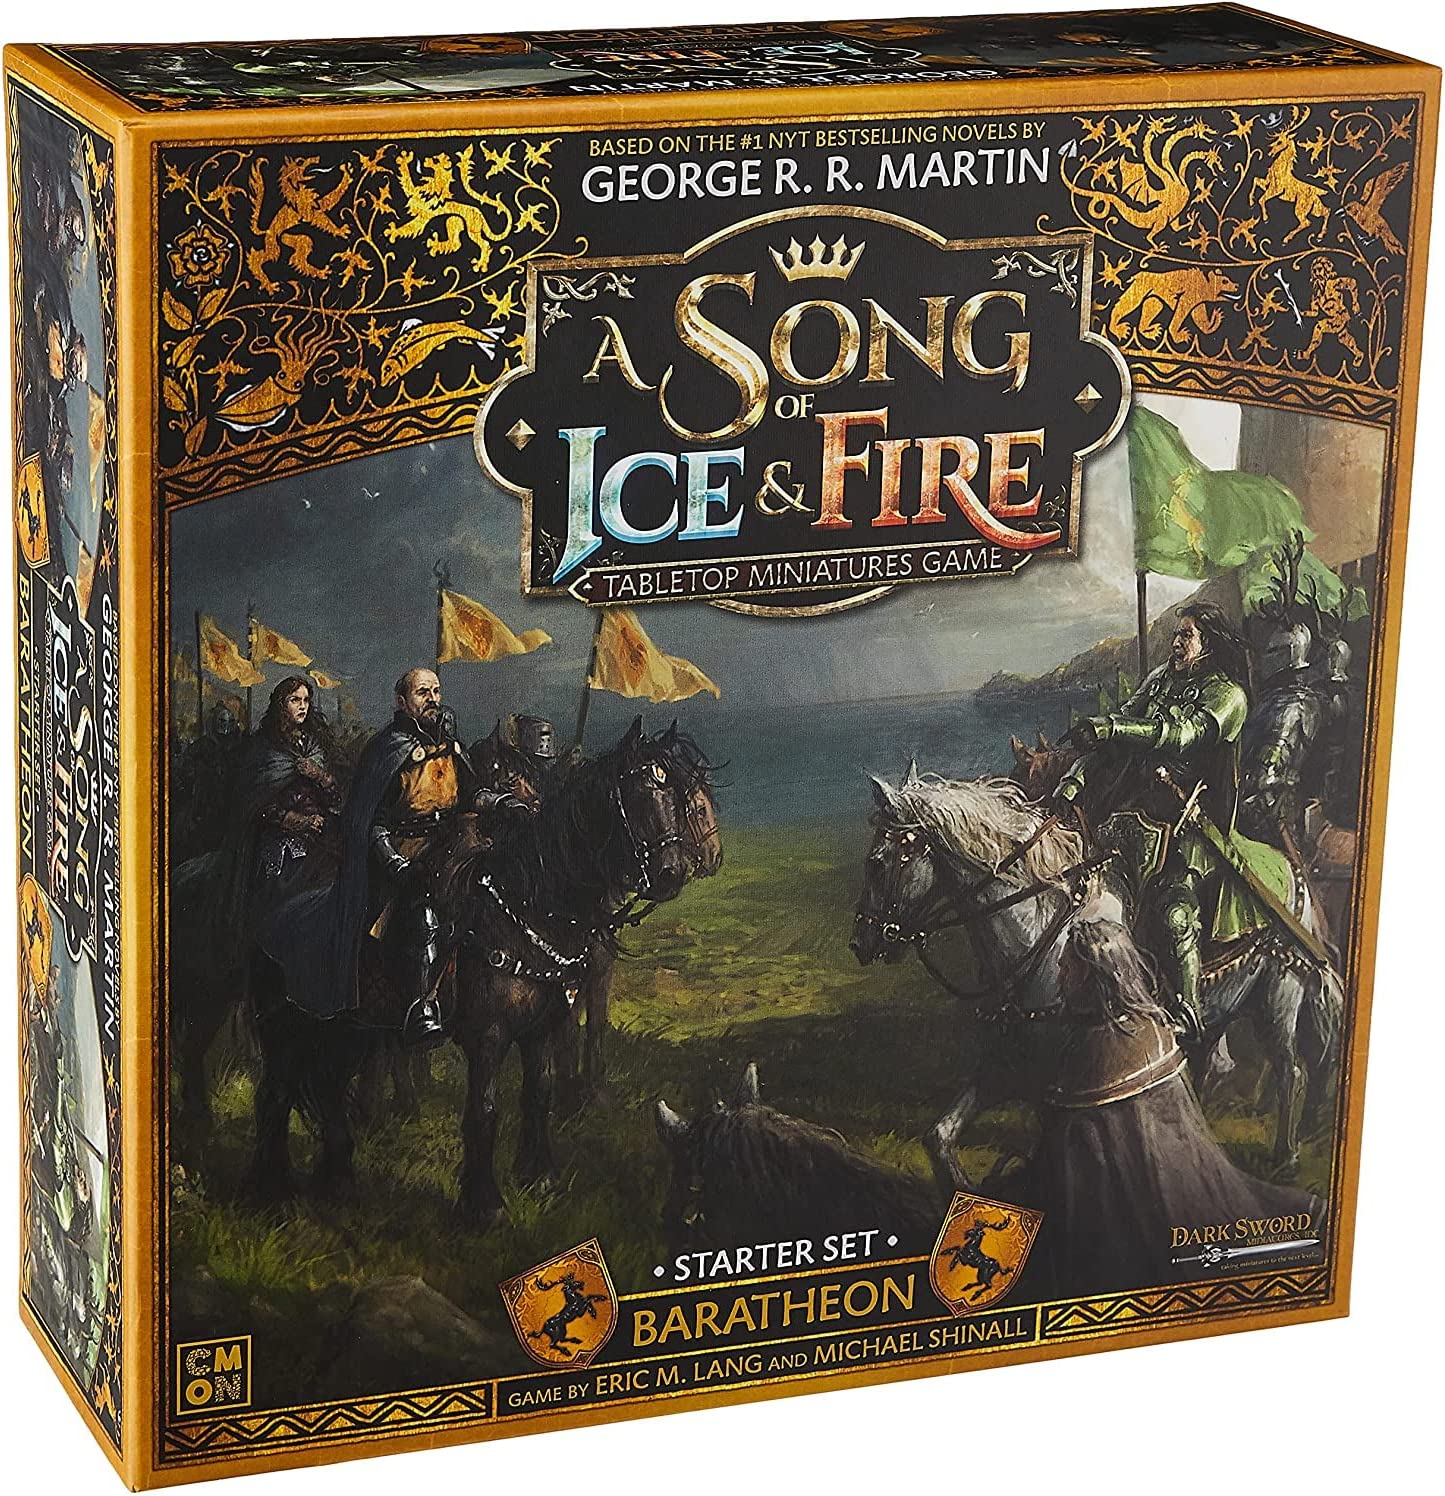 A Song of Ice and Fire Tabletop Miniatures Game Baratheon Starter Set | Strategy Game for Teens and Adults | Ages 14+ | 2+ Players | Average Playtime 45-60 Minutes | Made by CMON